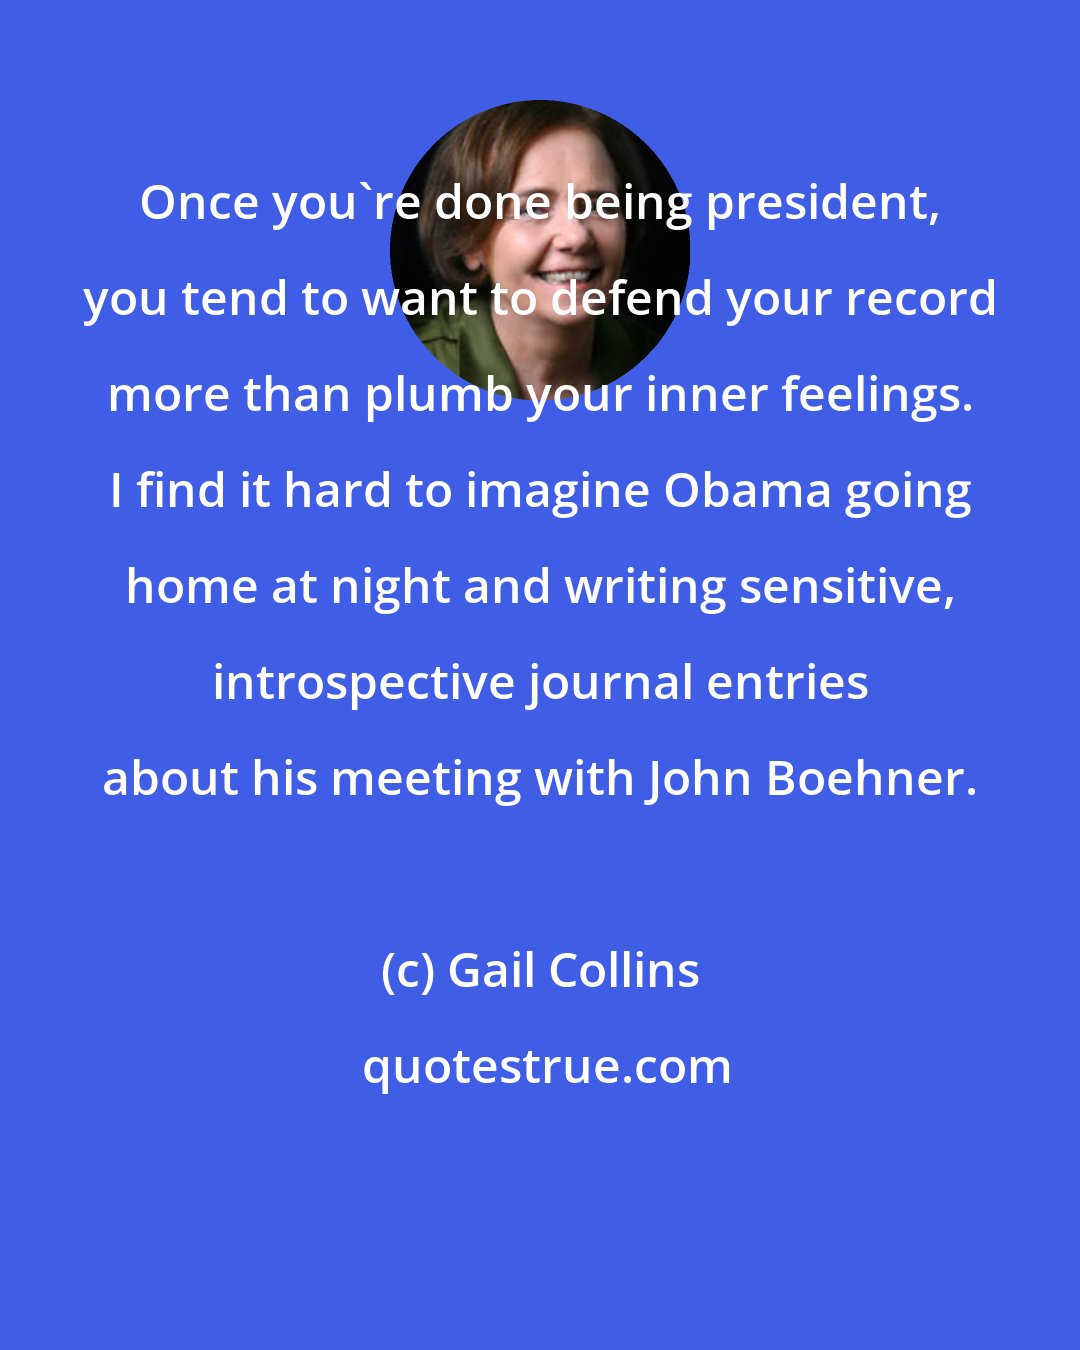 Gail Collins: Once you're done being president, you tend to want to defend your record more than plumb your inner feelings. I find it hard to imagine Obama going home at night and writing sensitive, introspective journal entries about his meeting with John Boehner.